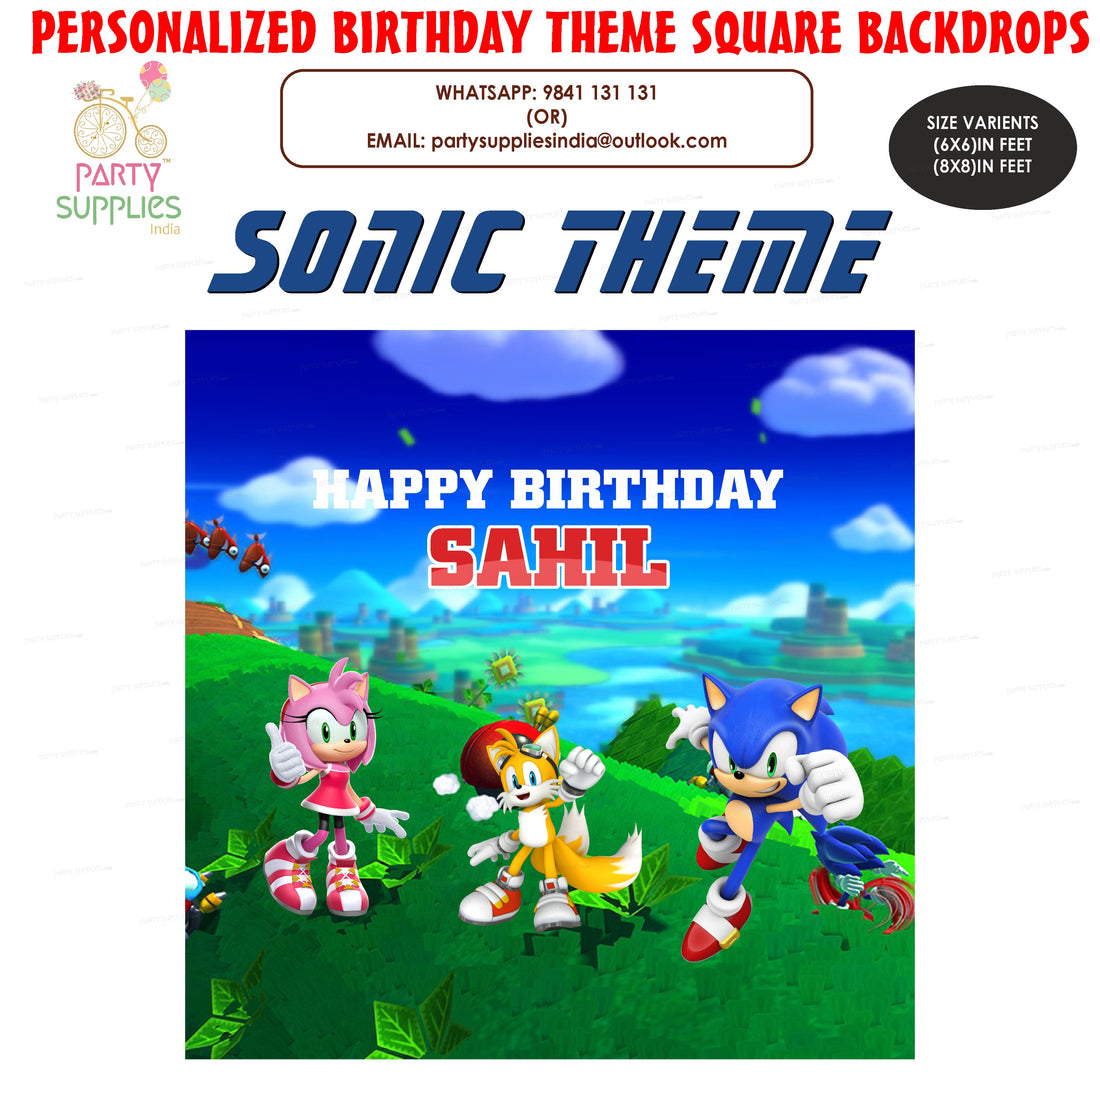 PSI Sonic the Hedgehog Theme Personalized Square Backdrop